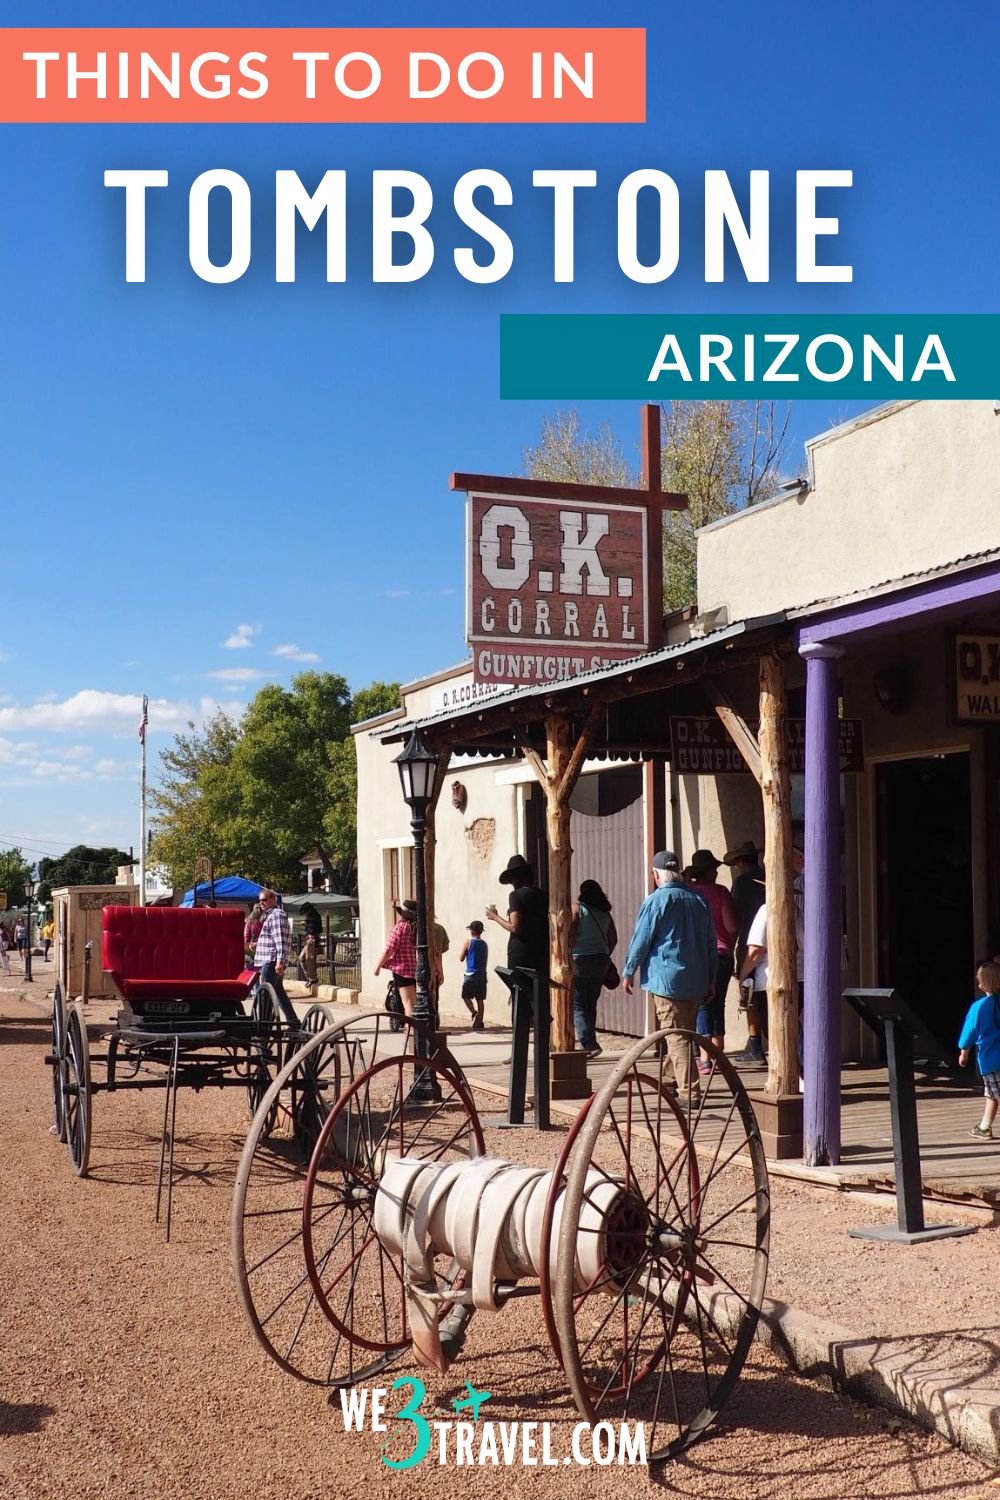 If you are planning a trip to Arizona, be sure to add in a day trip to the Old West town of Tombstone, home to the O.K. Corral. Just one hour from Tucson, this slice of the wild west is a unique gem.